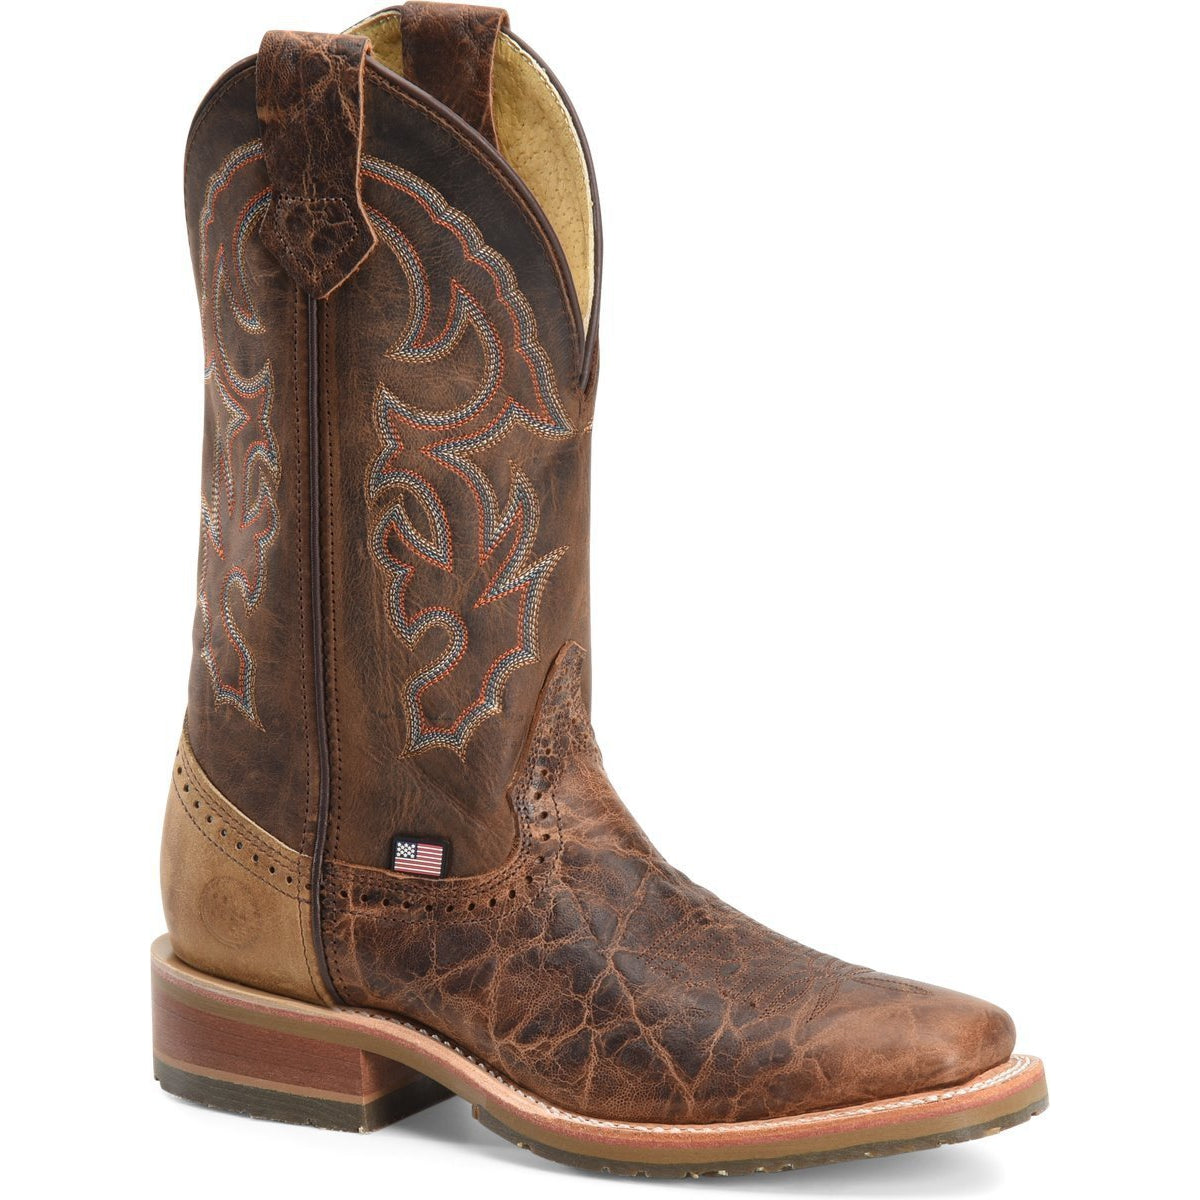 Double H Men's Harshaw 12" Sqr Toe USA Made Western Work Boot - DH4645 7.5 / Medium / Light Brown - Overlook Boots